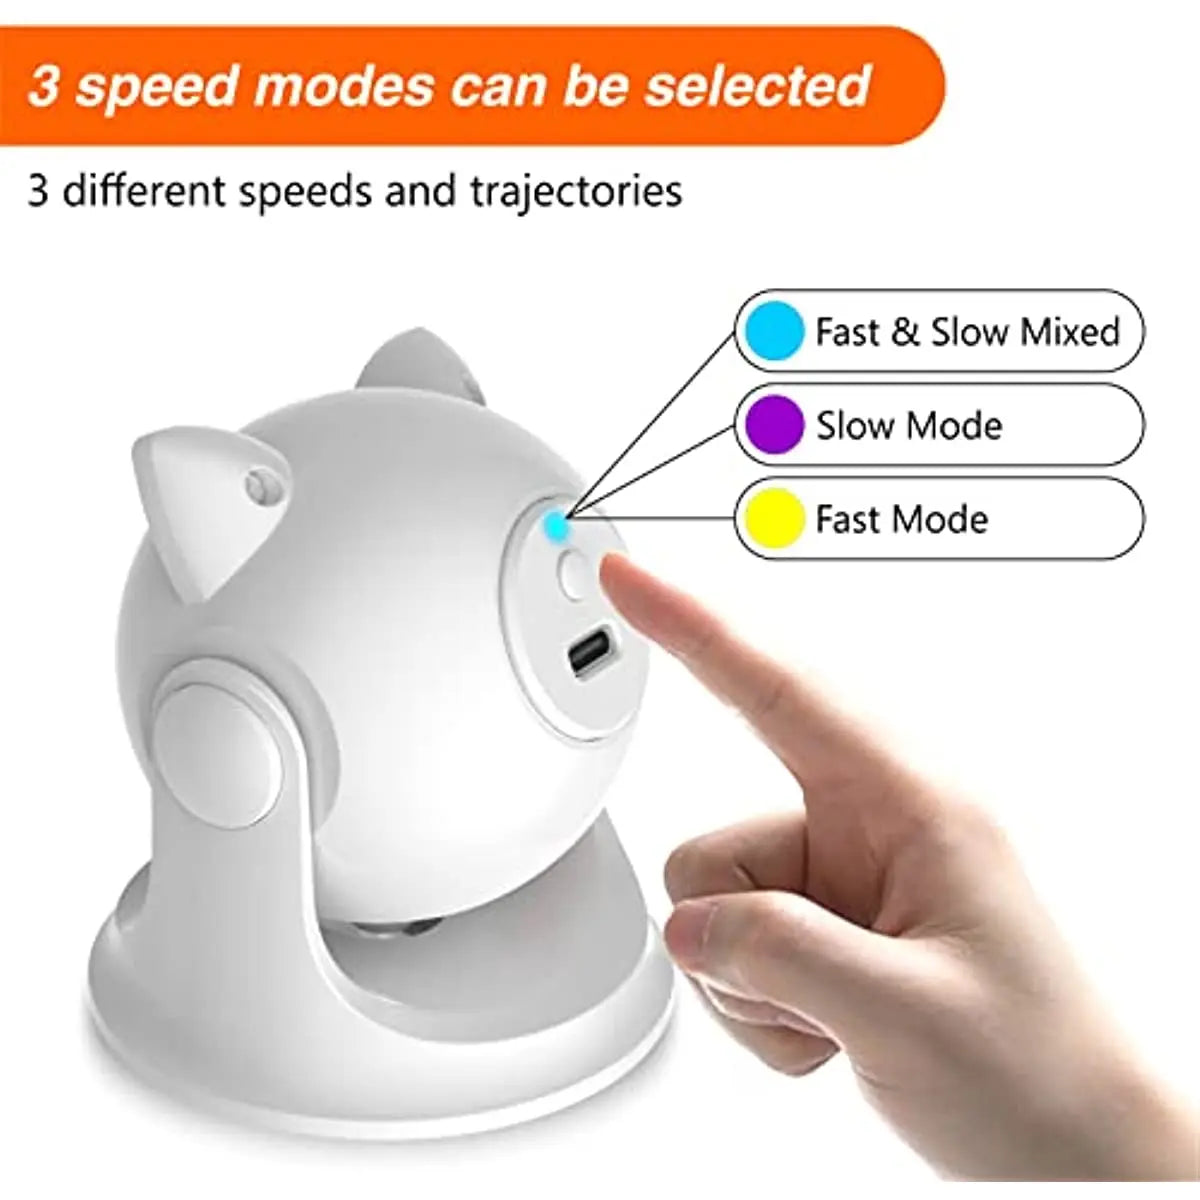 Moushou Pets & Co.ᵀᴹ ATUBAN Automatic Cat Laser Toy for Indoor Cats